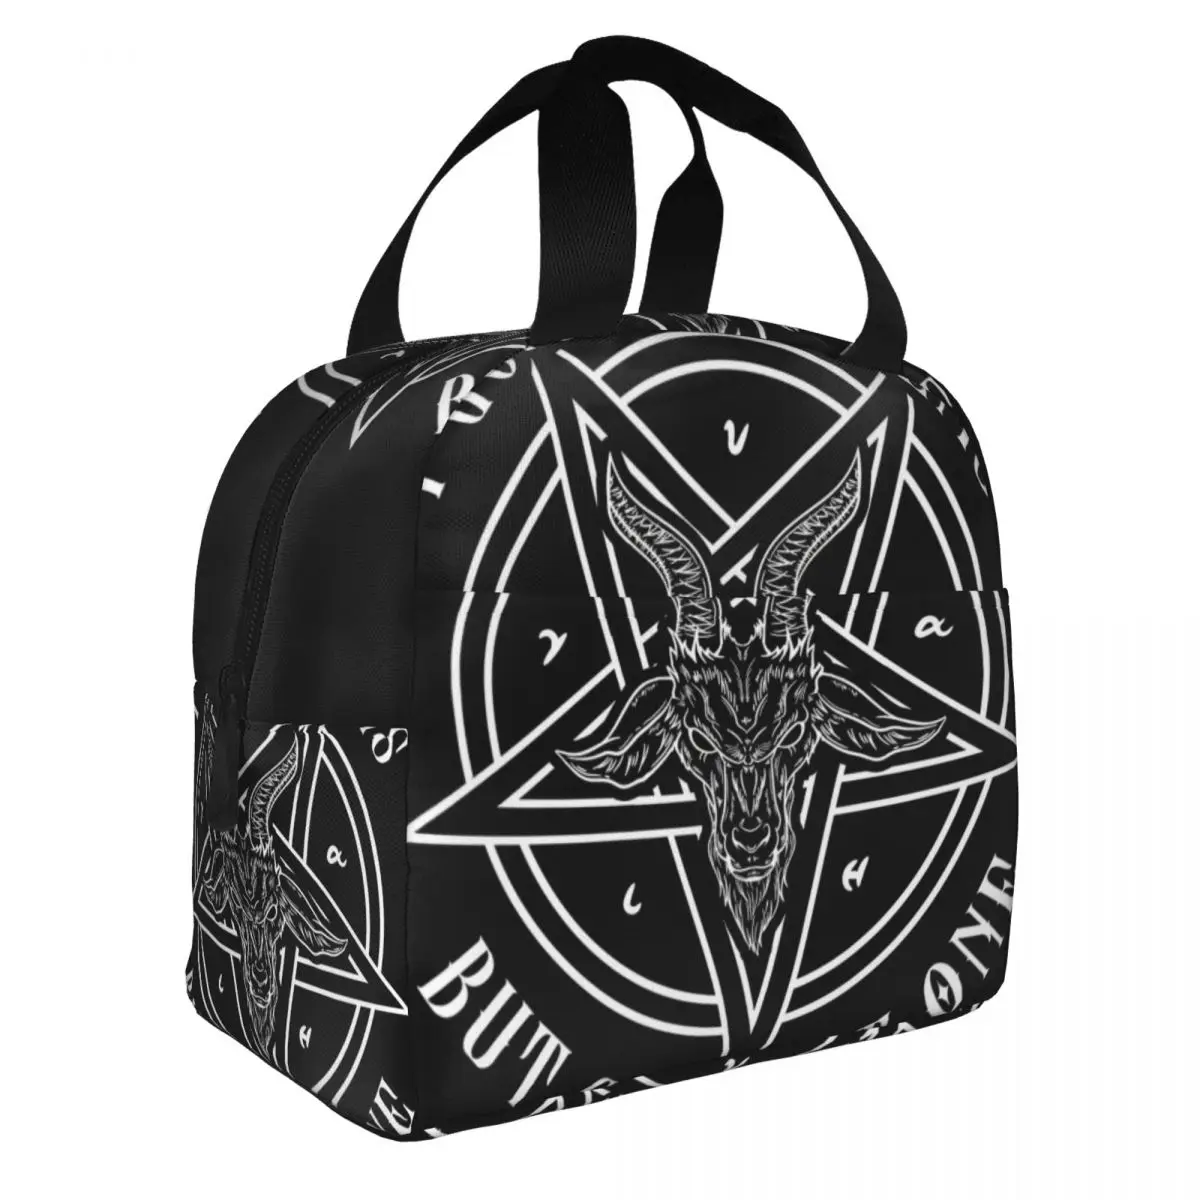 Satanic Goat,Baphomet  Lunch Bento Bags Portable Aluminum Foil thickened Thermal Cloth Lunch Bag for Women Men Boy